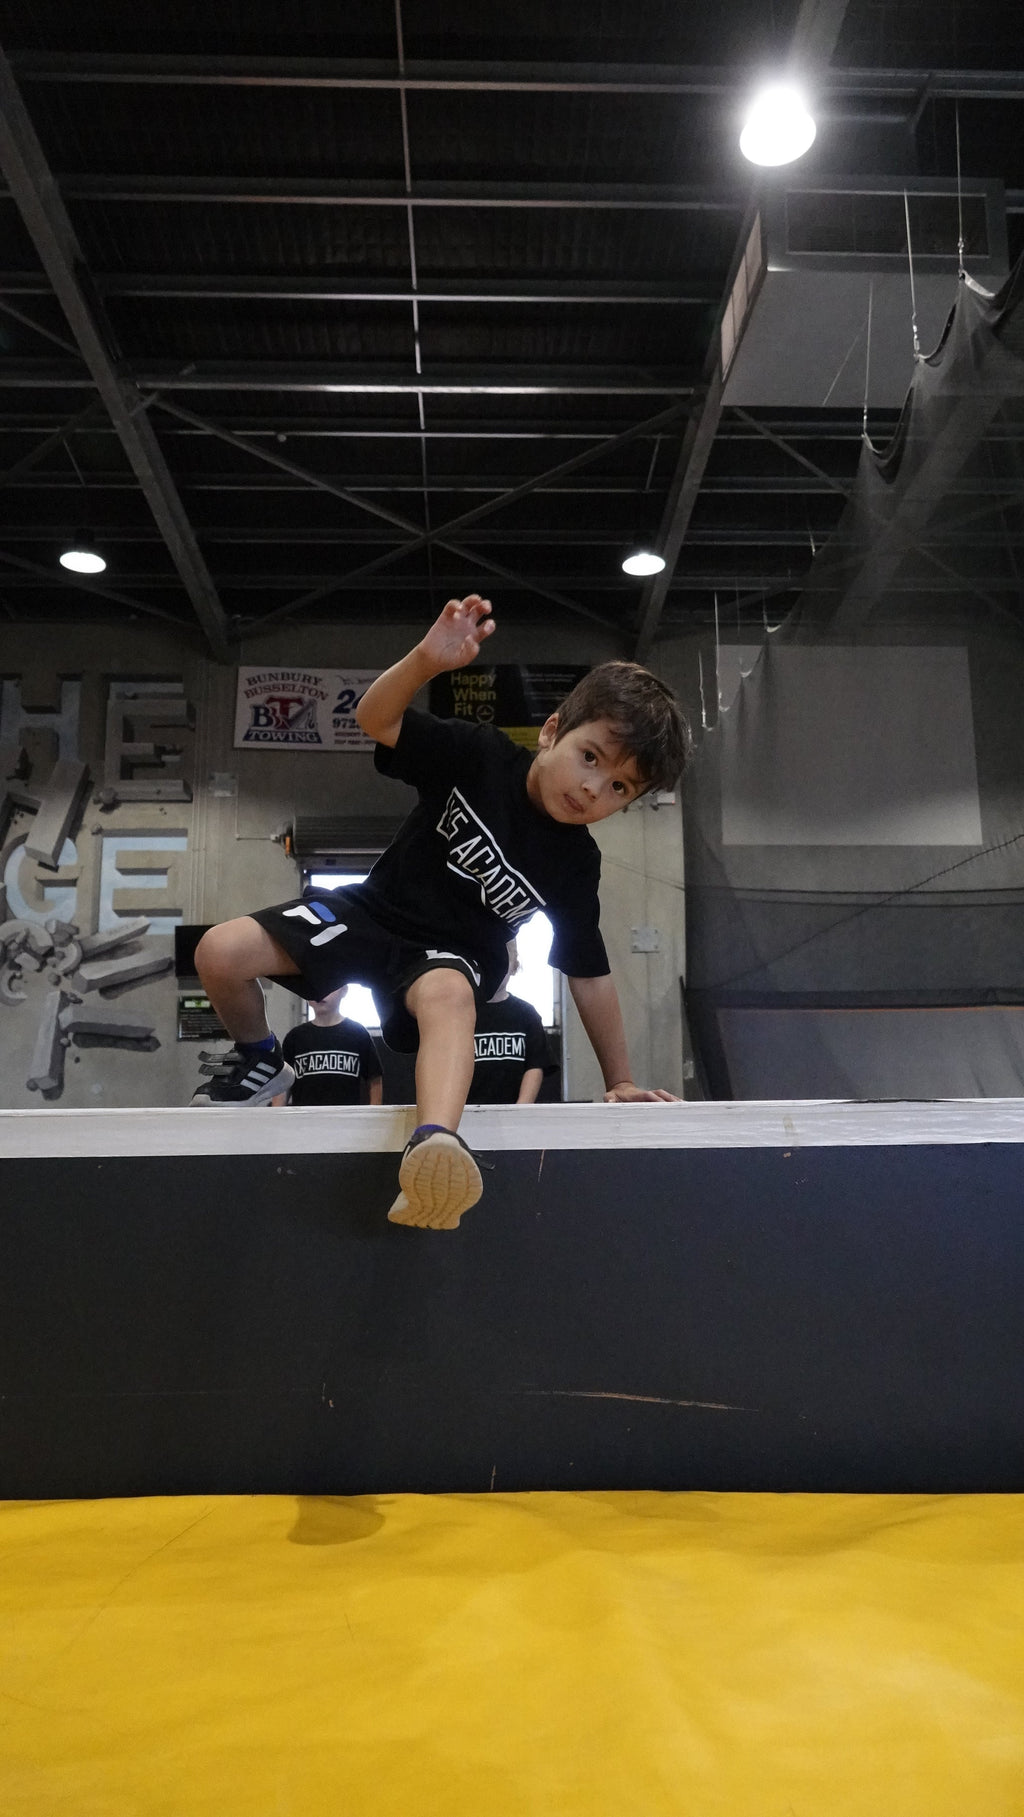 PEE-WEE PARKOUR:   . 3-4 YRS FRIDAY 9:00-9:30 TERM 2